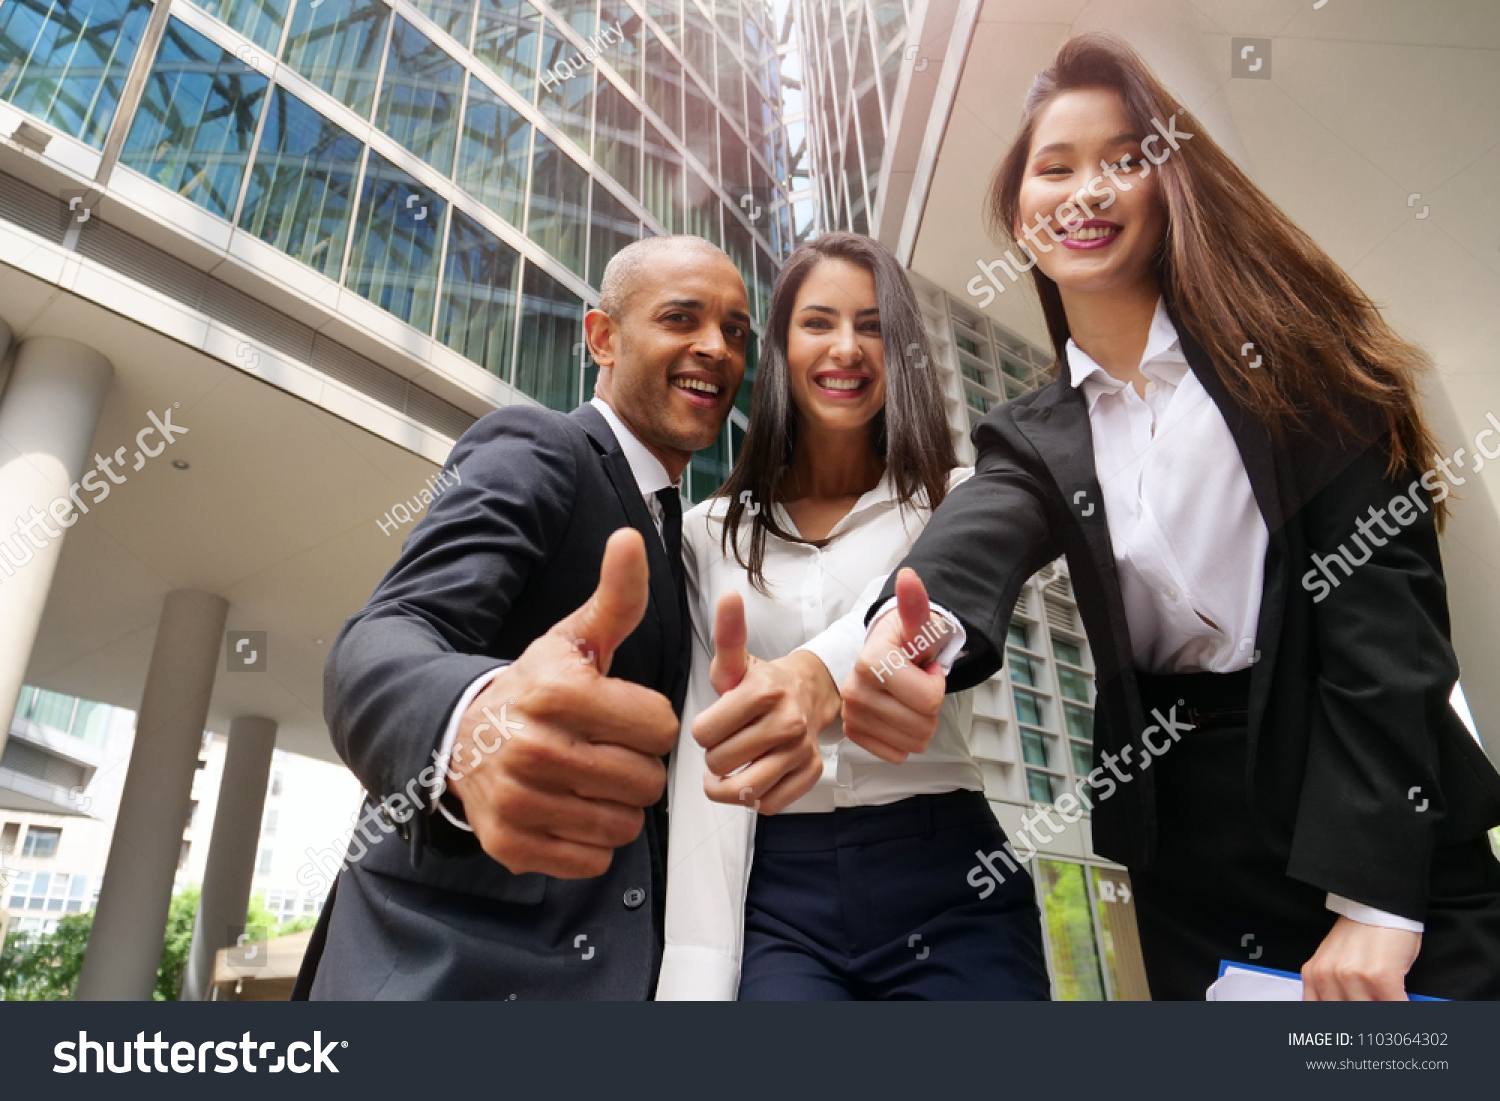 Business people of different ethnicities dressed in suits and ties, smile and "ok" raising their thumbs to celebrate the team's success. Concept of: internationality and career, cooperation. #1103064302